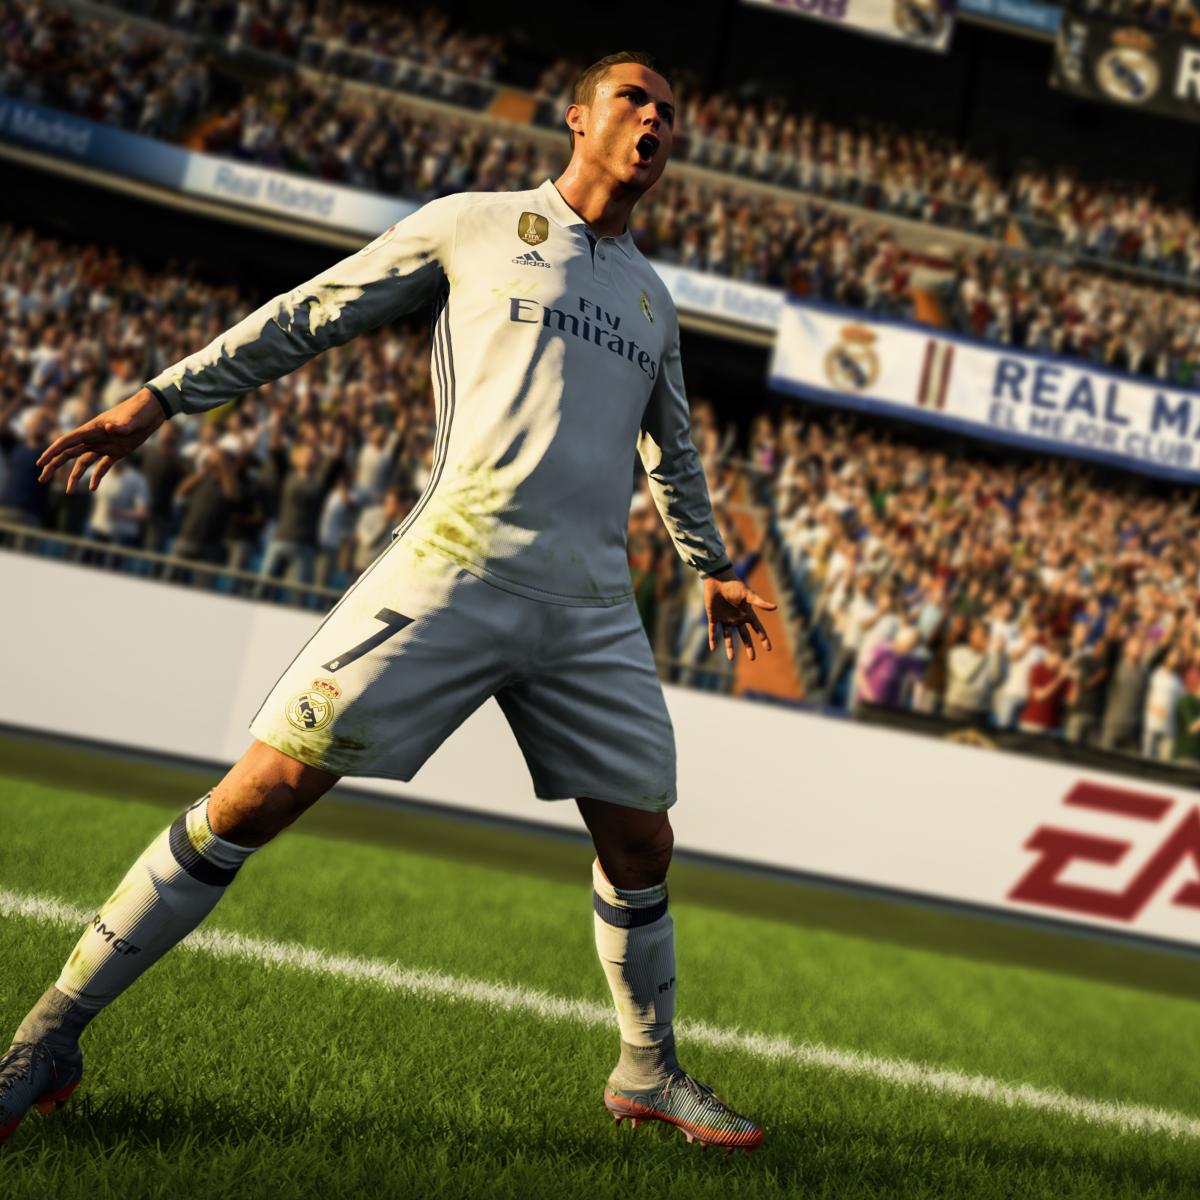 Fifa 18 Preview Hands On With New Gameplay Features The Journey Season 2 More News Scores Highlights Stats And Rumors Bleacher Report